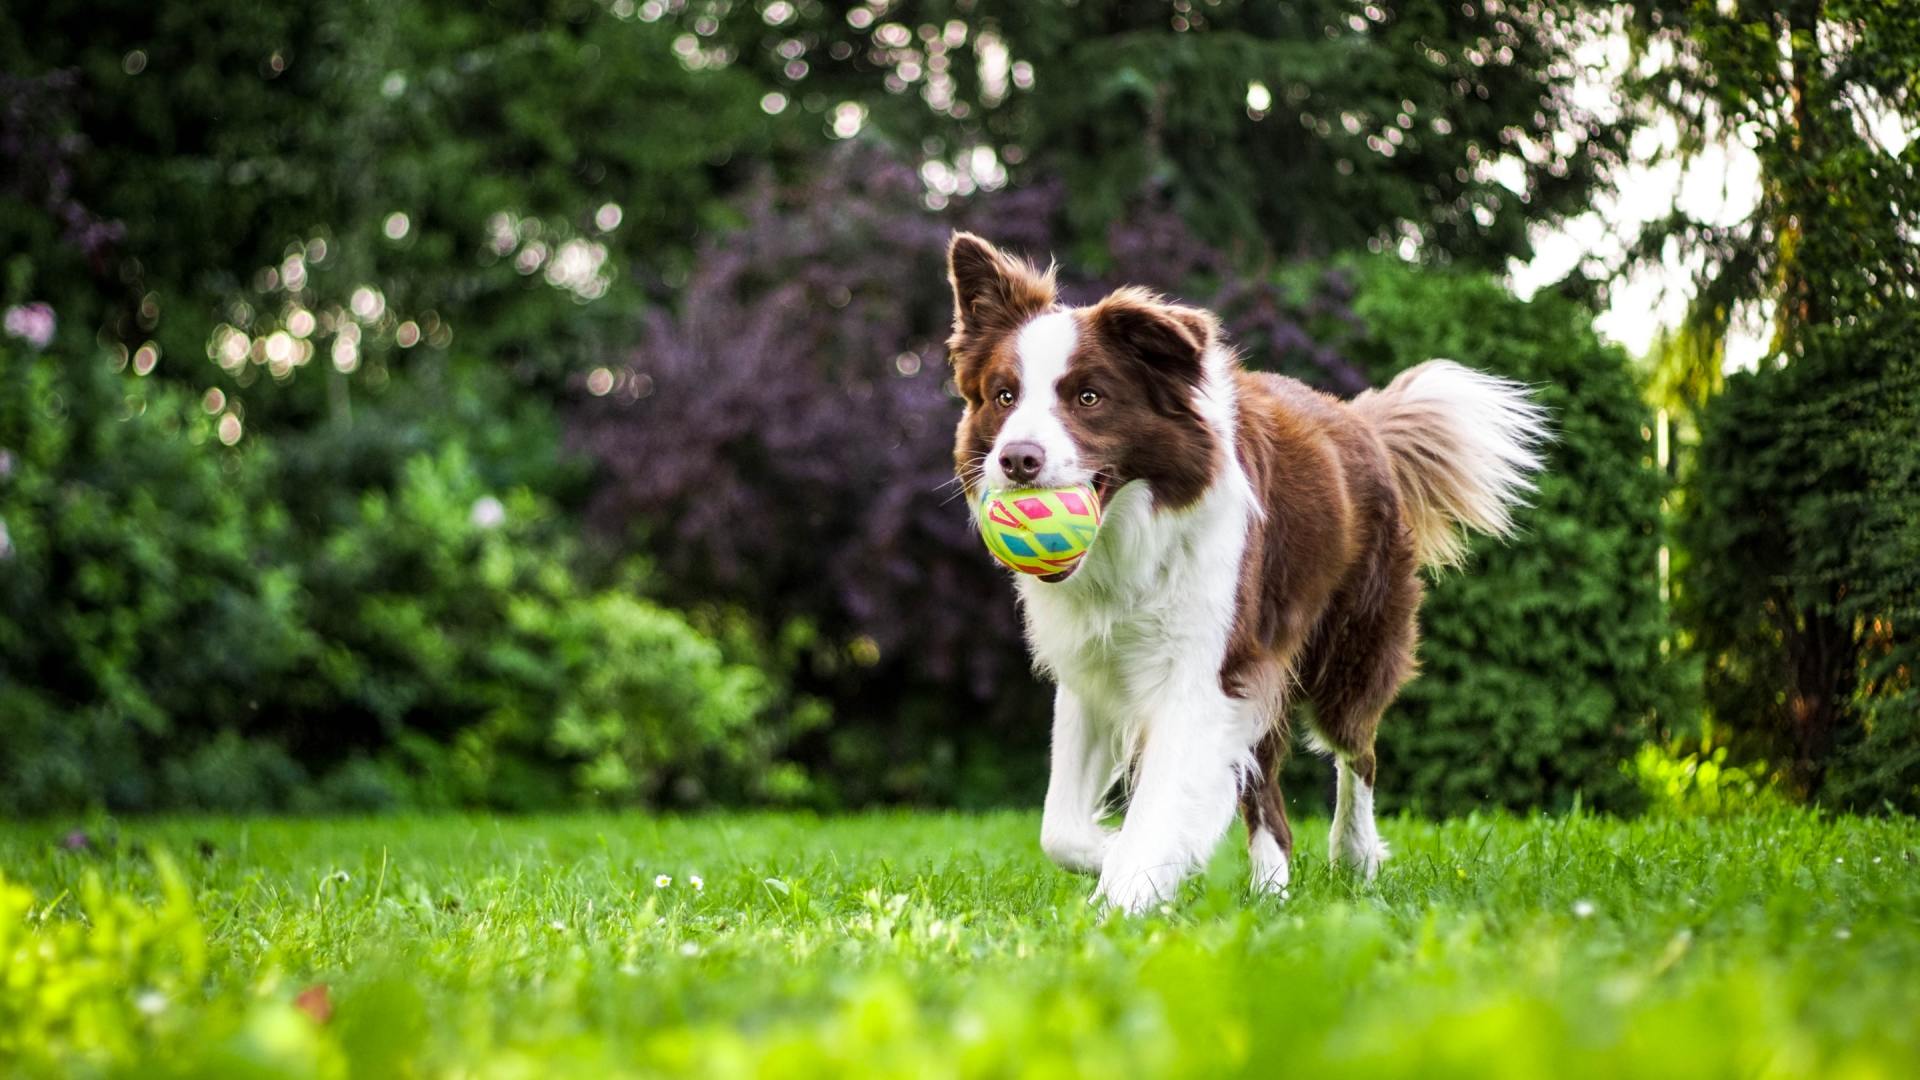 Dog with ball in mouth